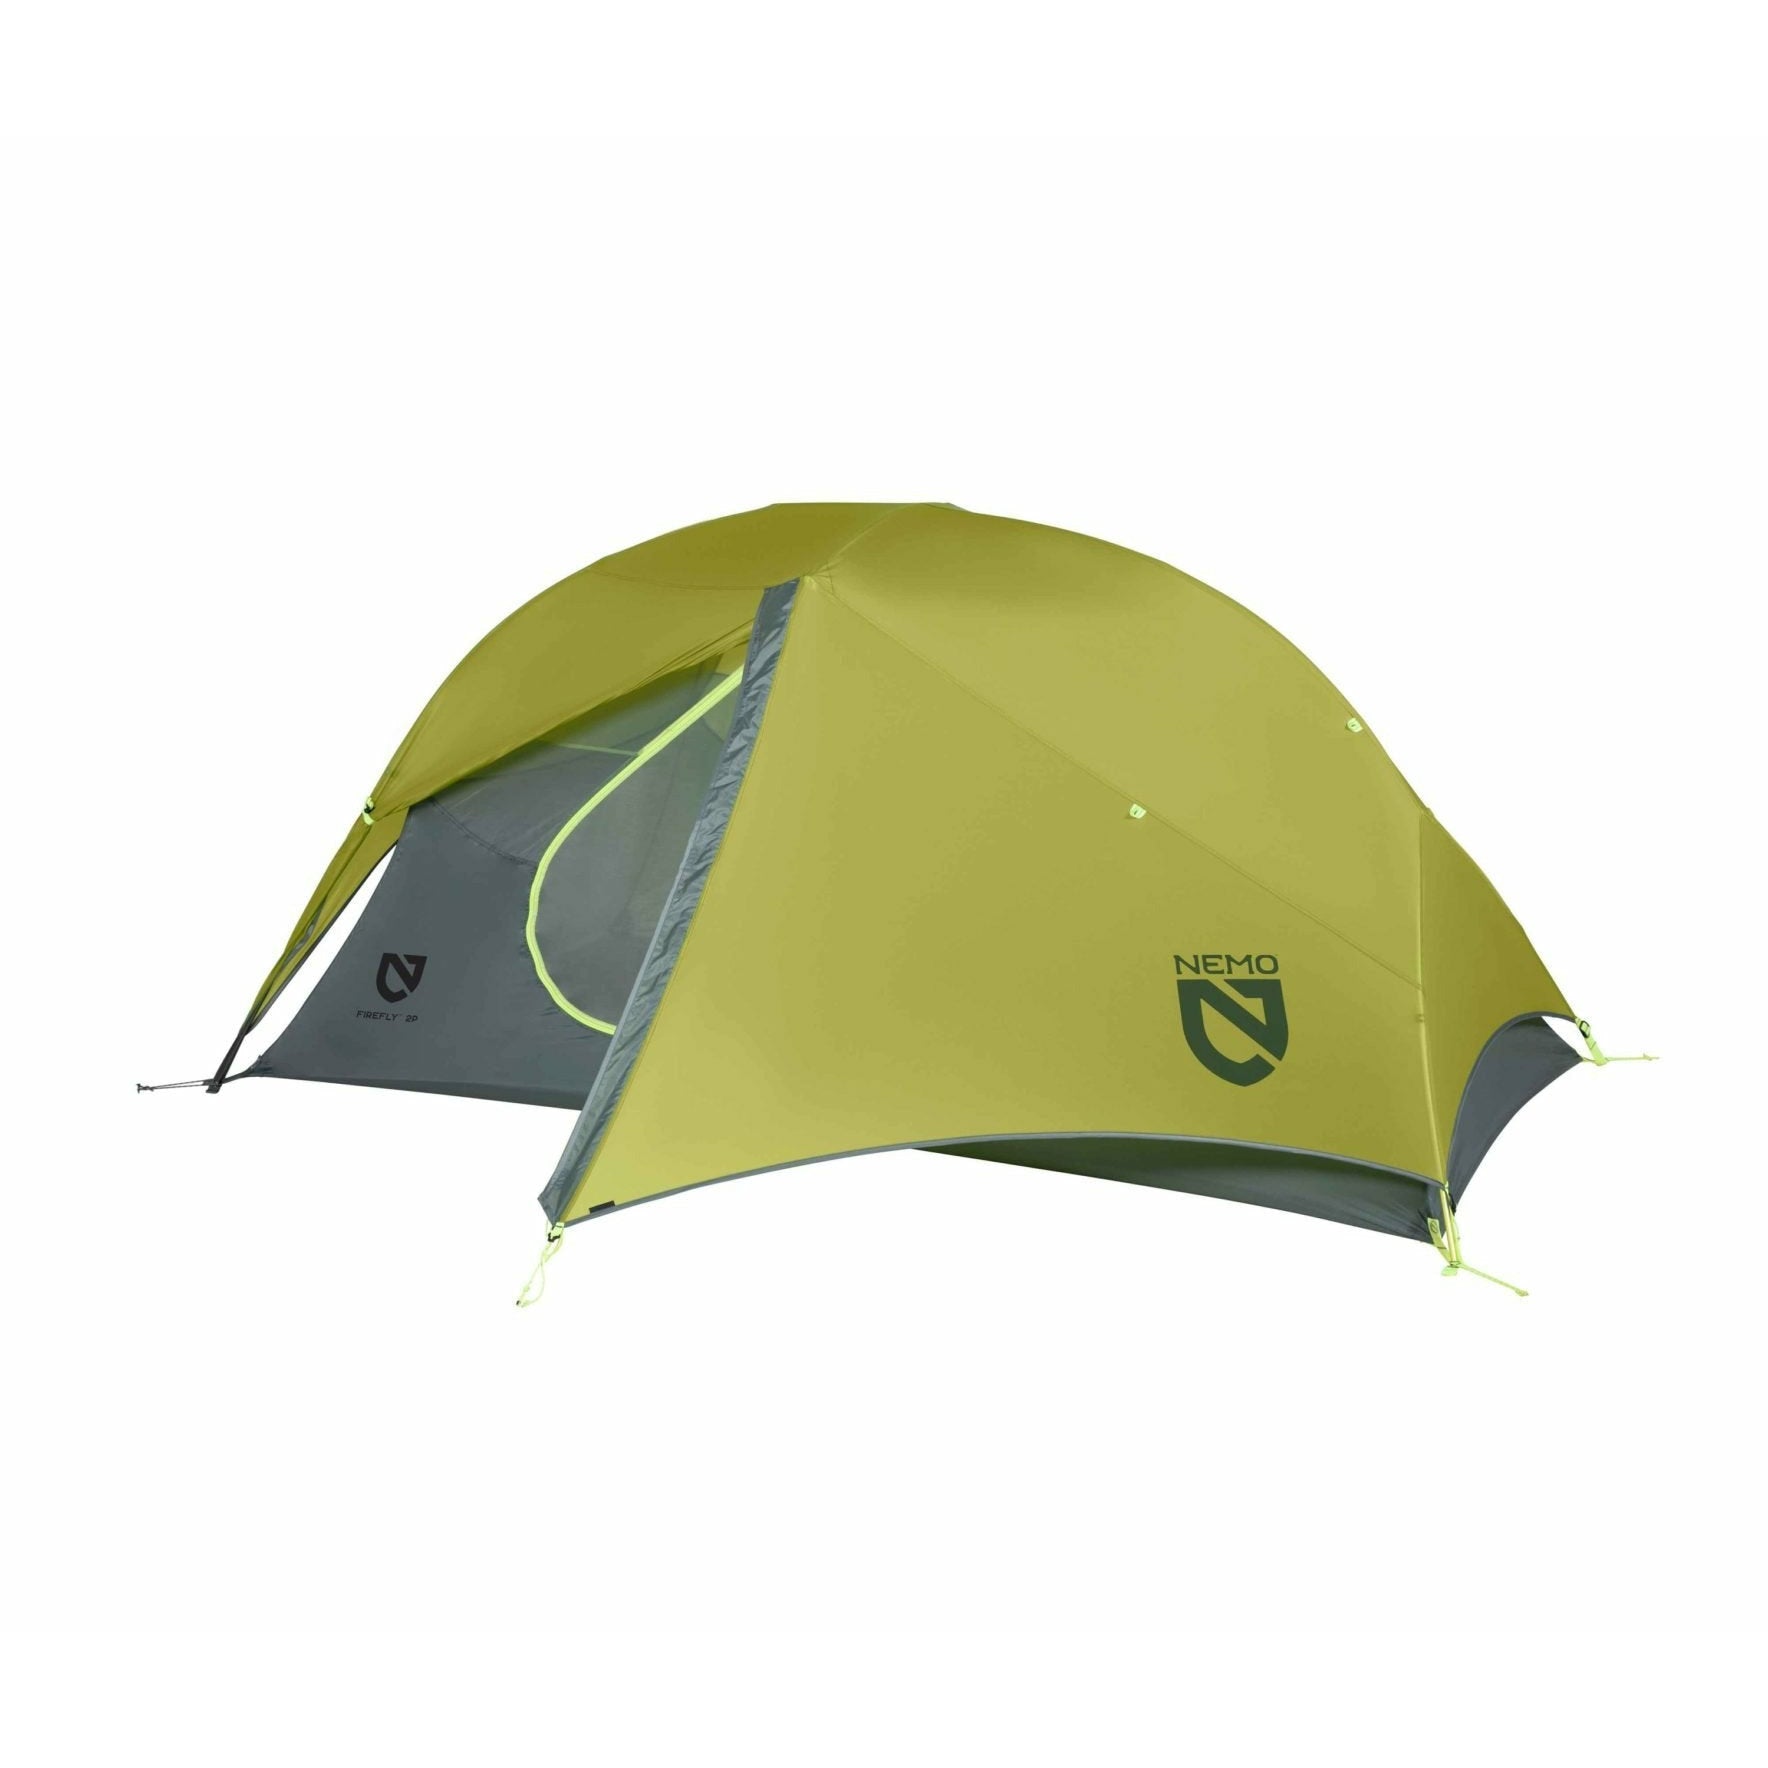 Nemo Firefly 2 Person Tent